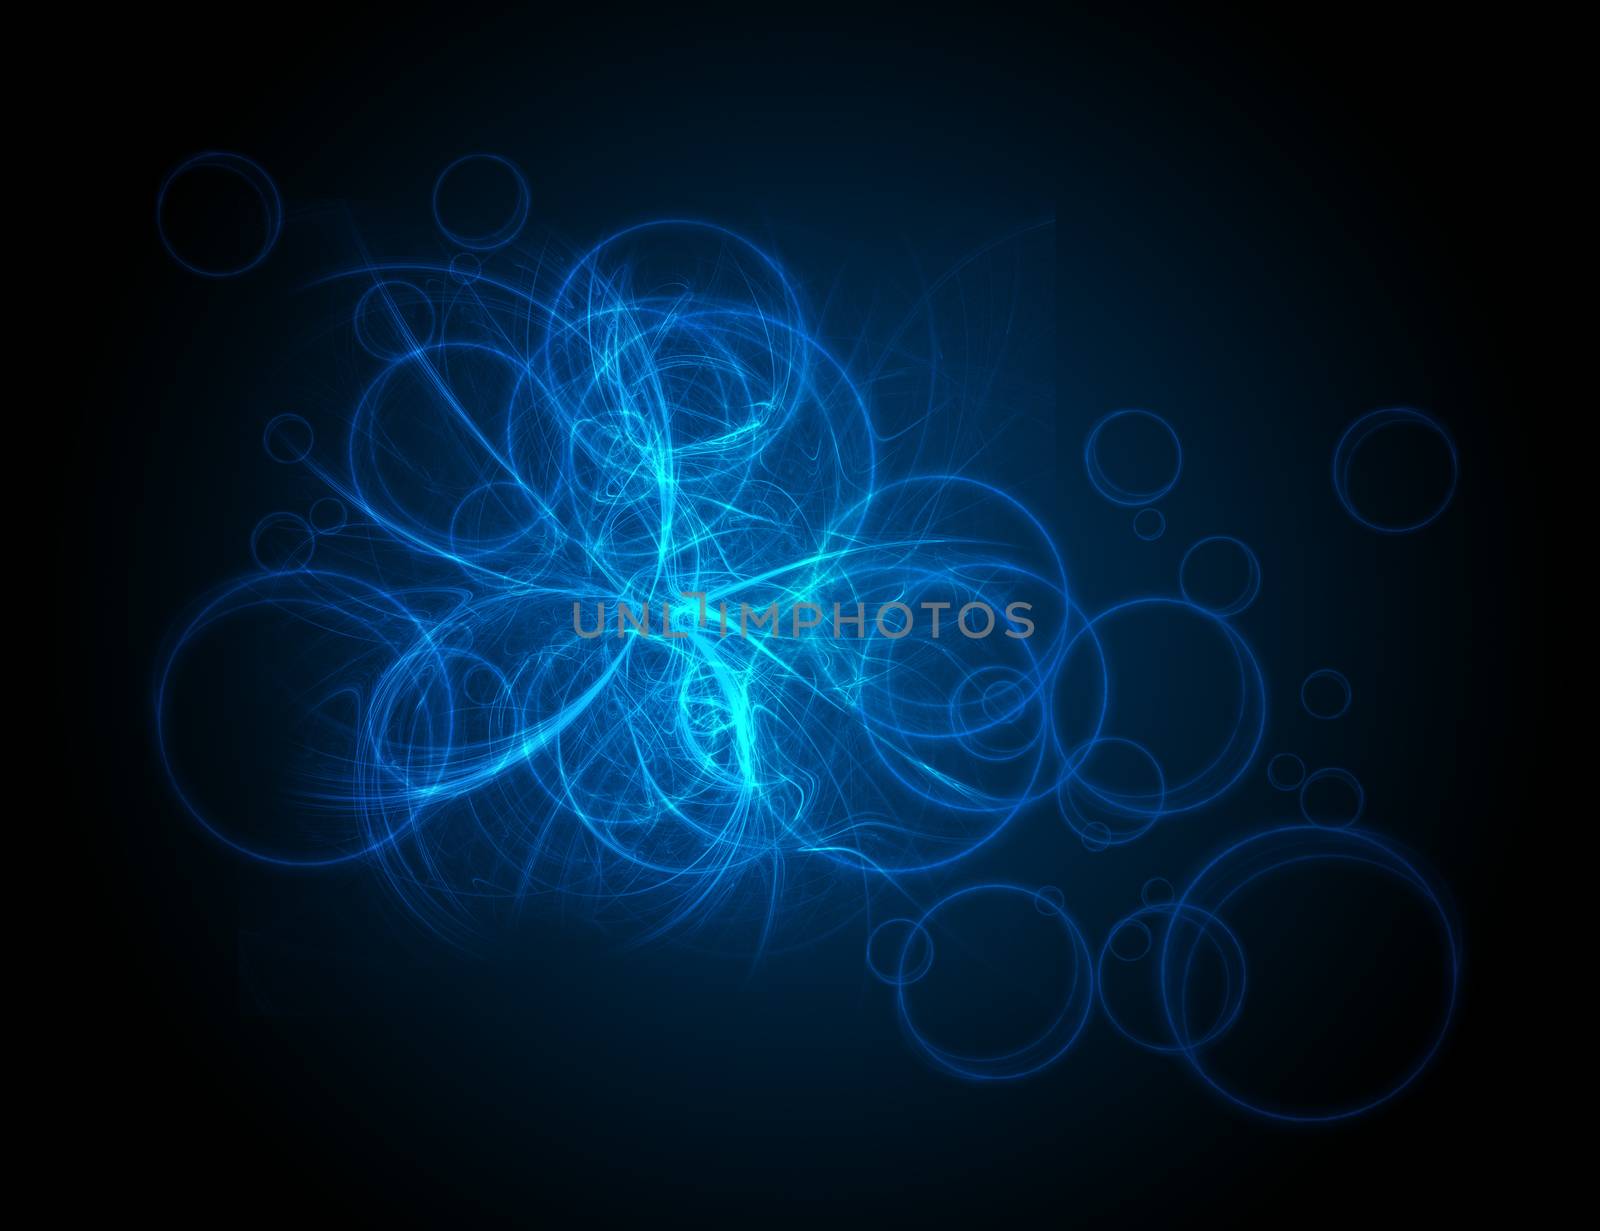 Abstract blue background with light and energy circles